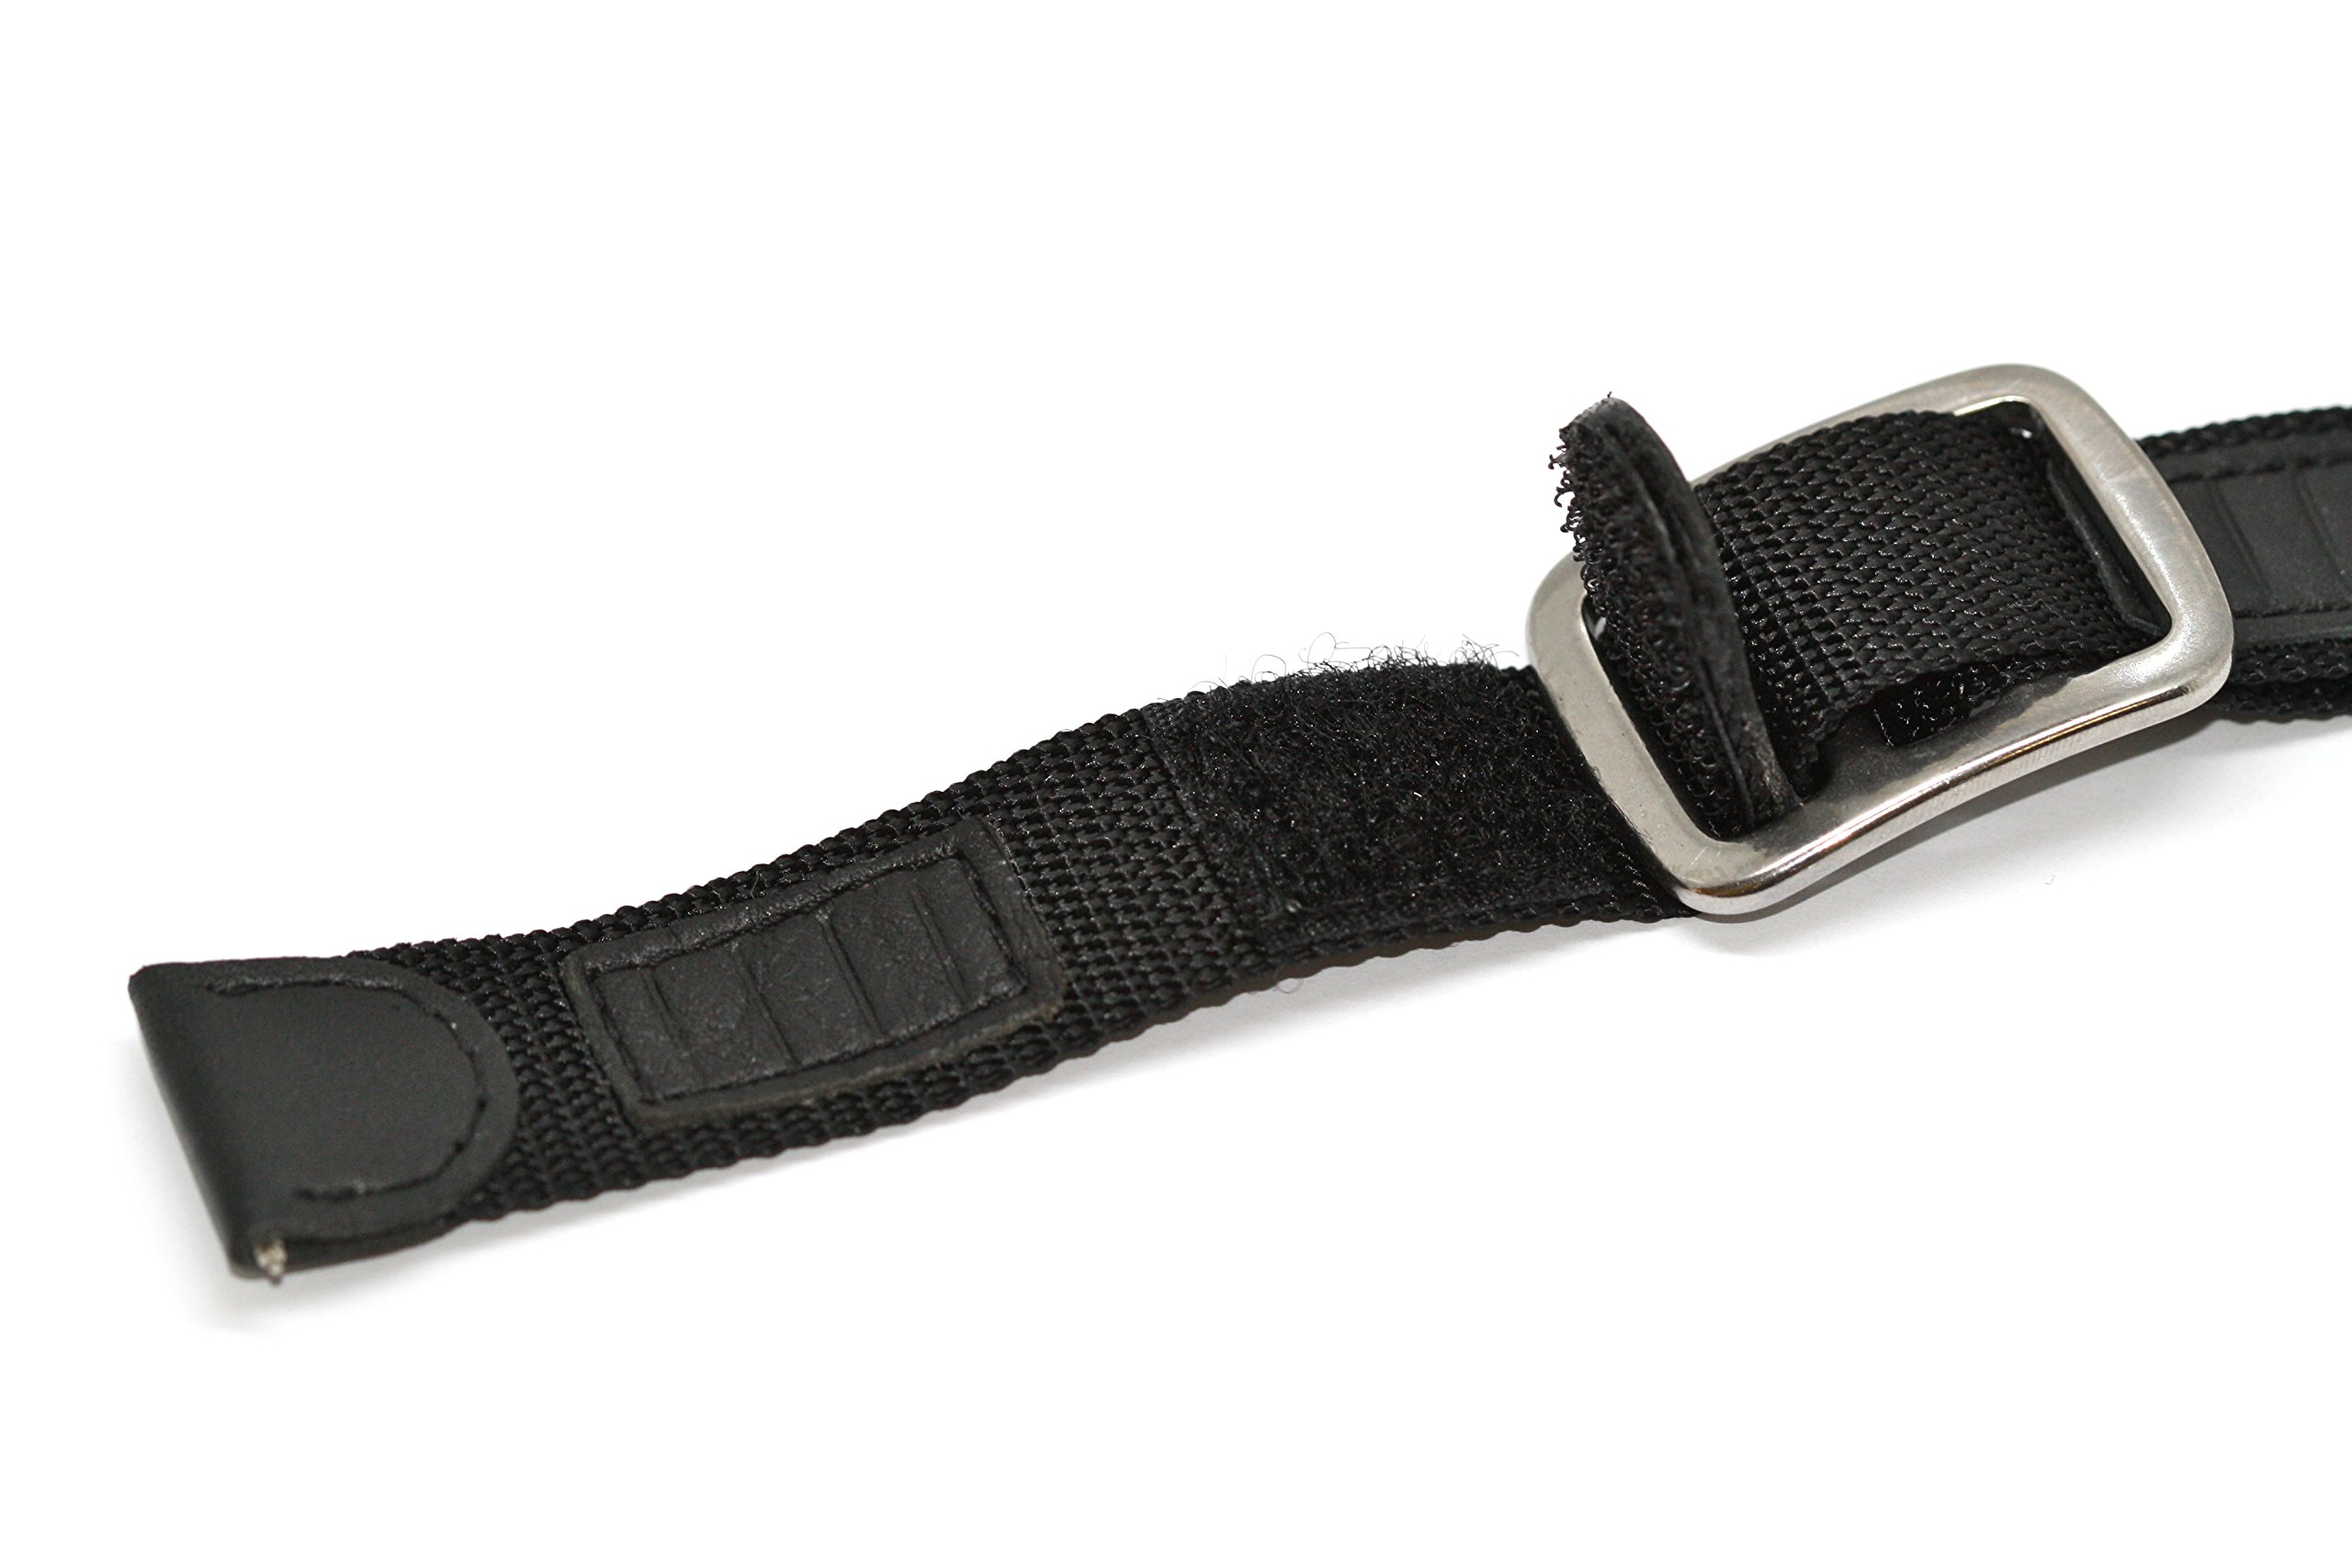 20MM Black Nylon Leather Hook & Loop Sport Watch Band Strap FITS Swiss Army and Others